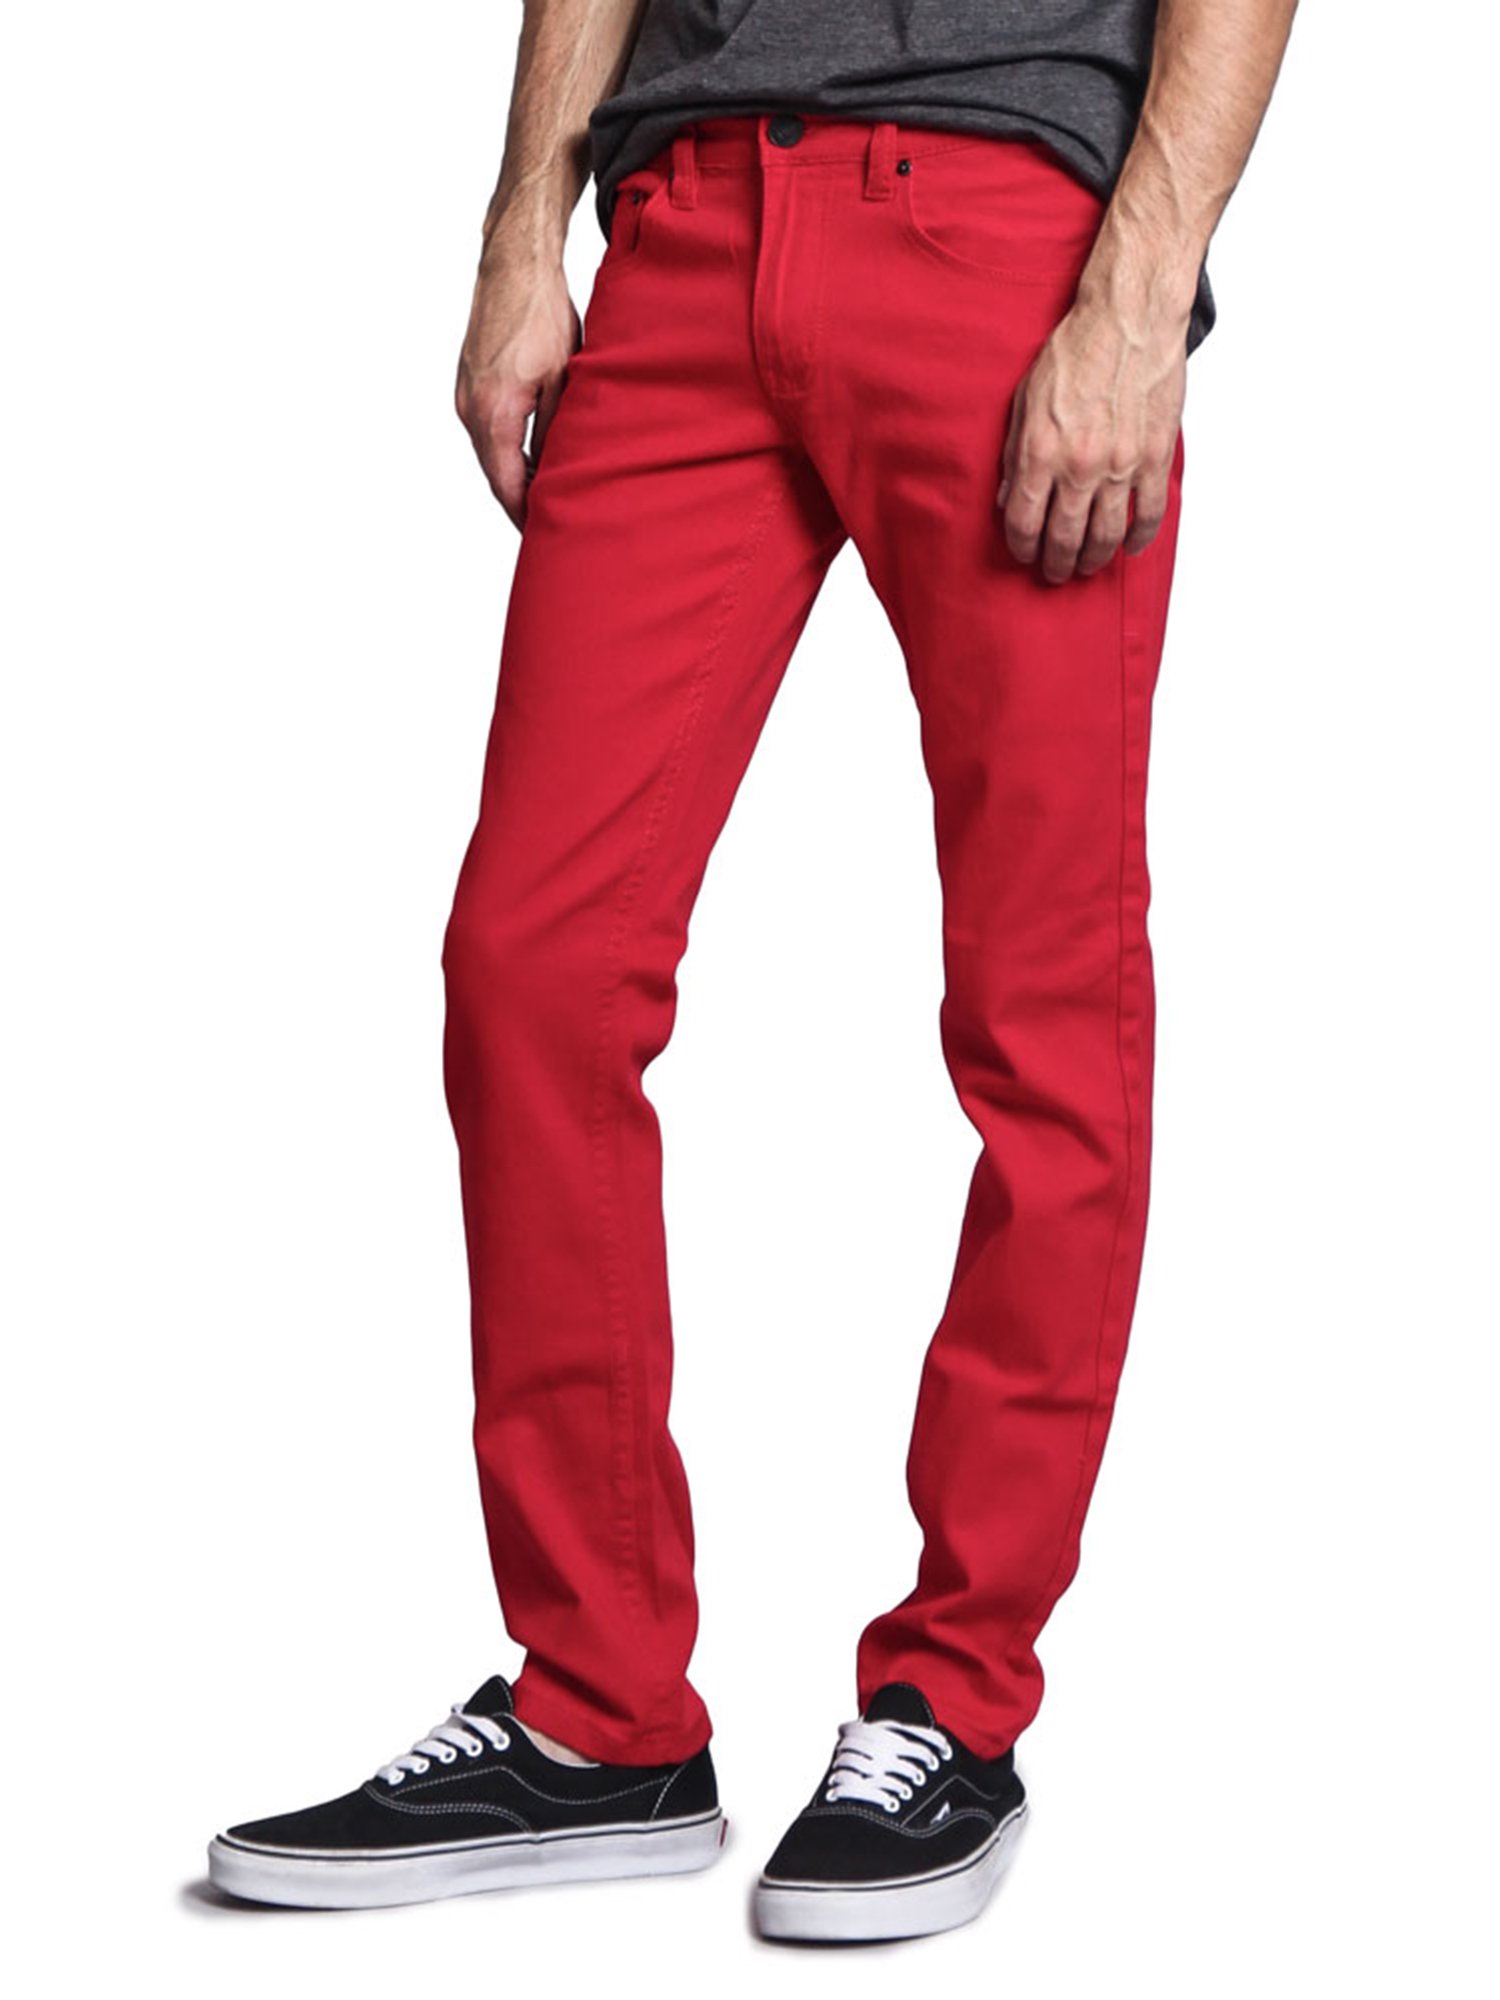 Victorious Mens Slim Fit Colored Stretch Jeans, Up To 44W - image 5 of 6